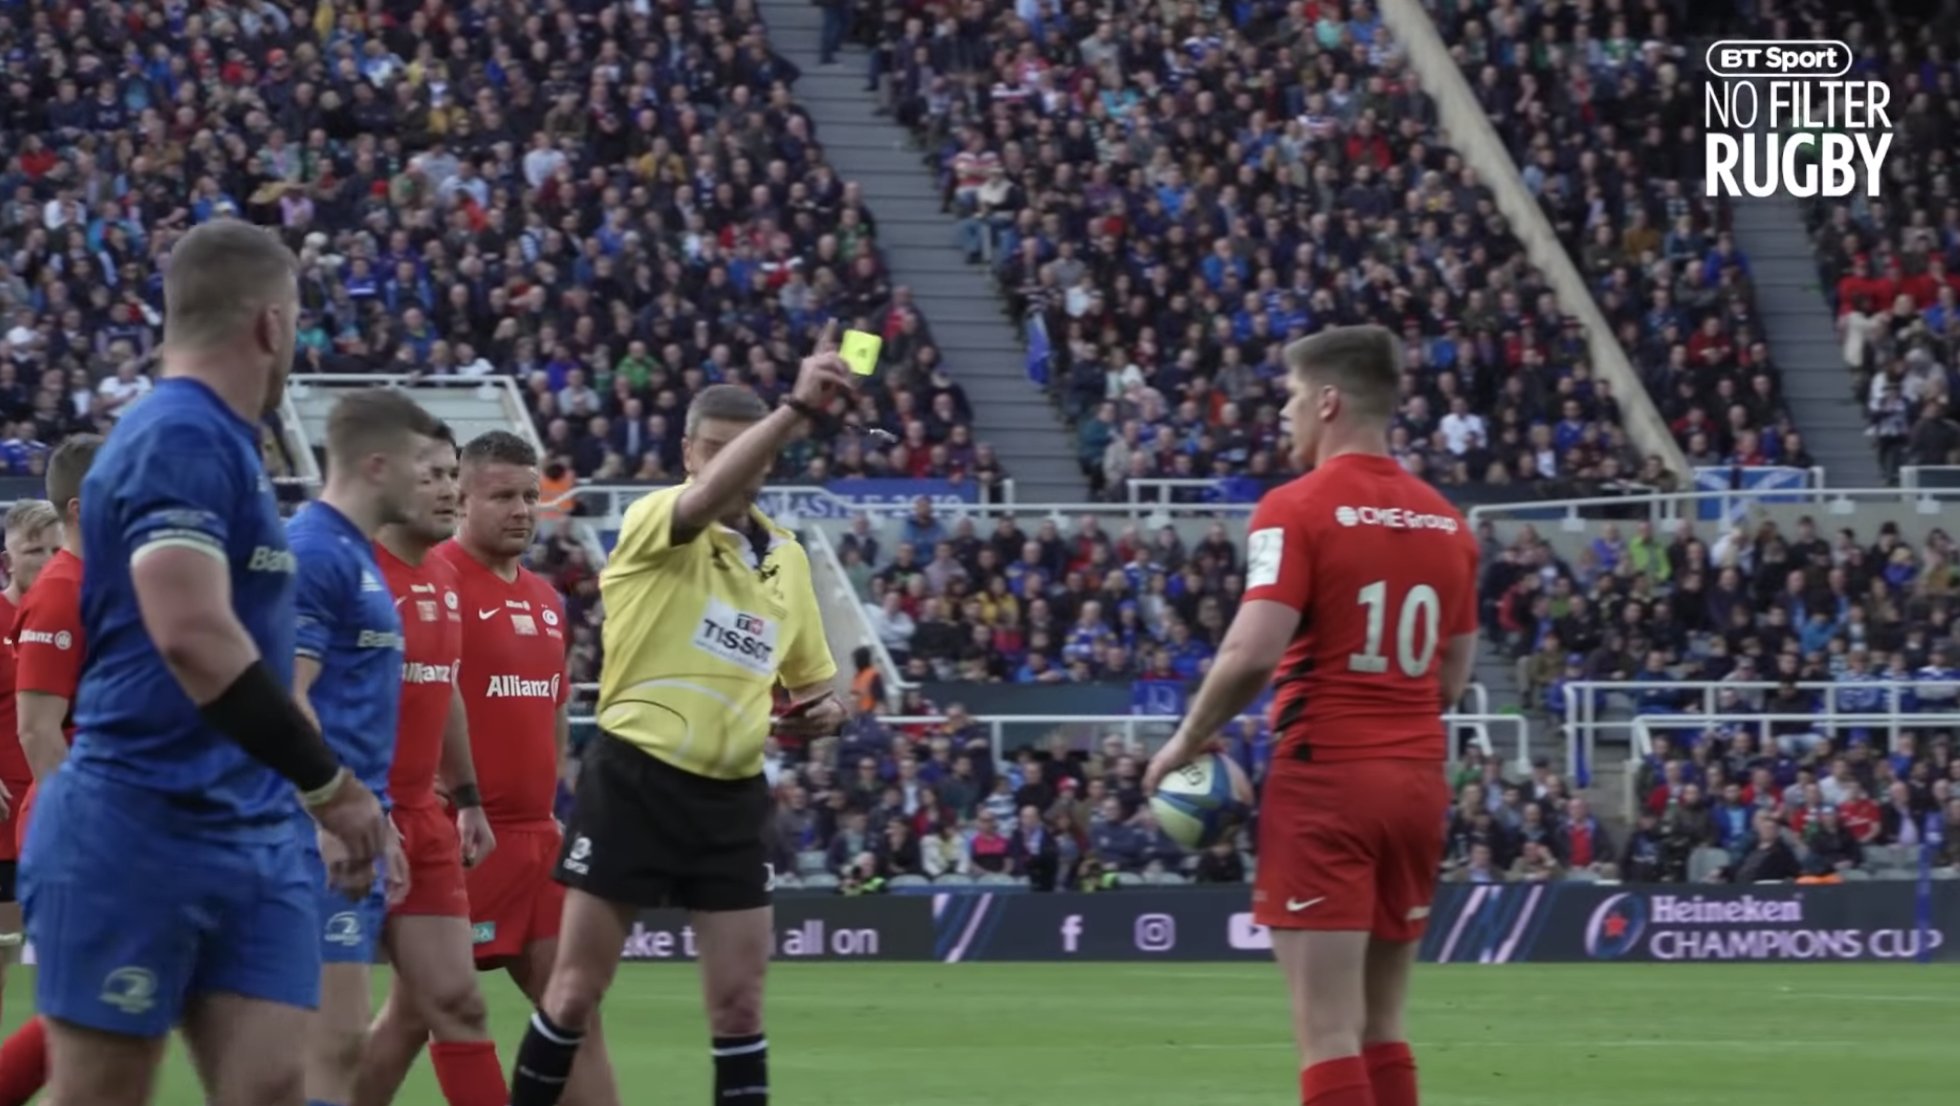 WATCH: The moment Owen Farrell almost lost it when he thought he had been sin binned